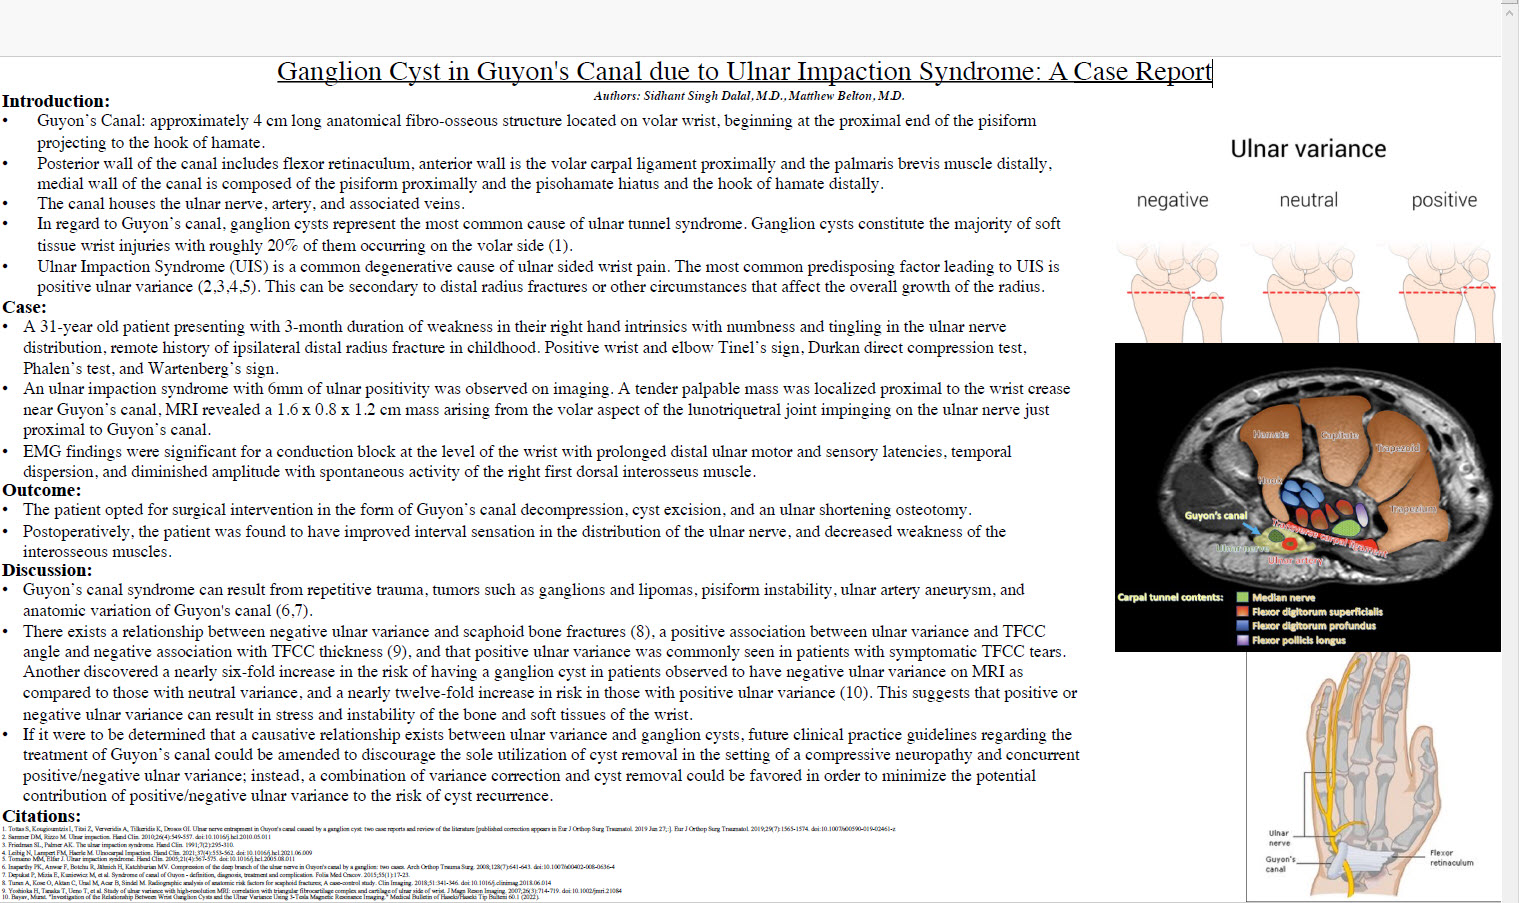 Ganglion Cyst in Guyons Canal due to Ulnar Impaction Syndrome-A Case Report